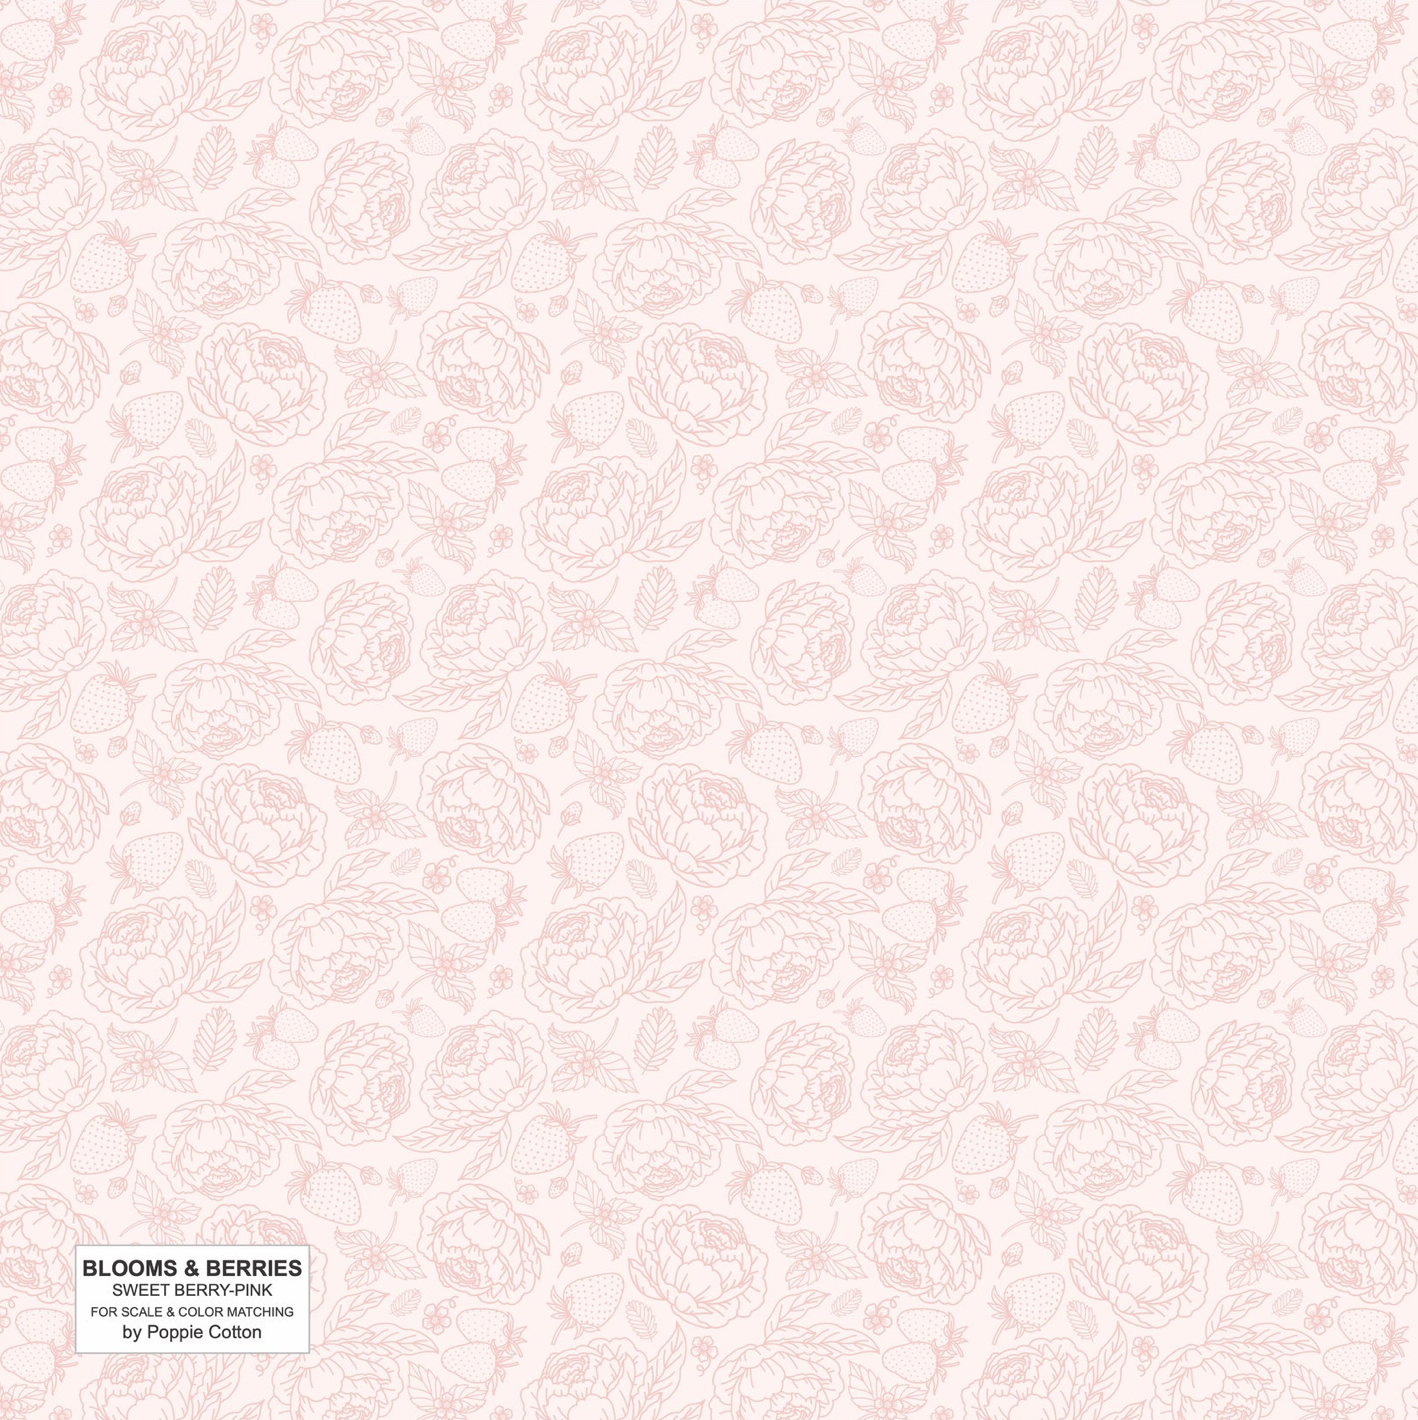 Blooms and Berries, Sweet Berry Pink, BAB2482, sold by the 1/2 yard